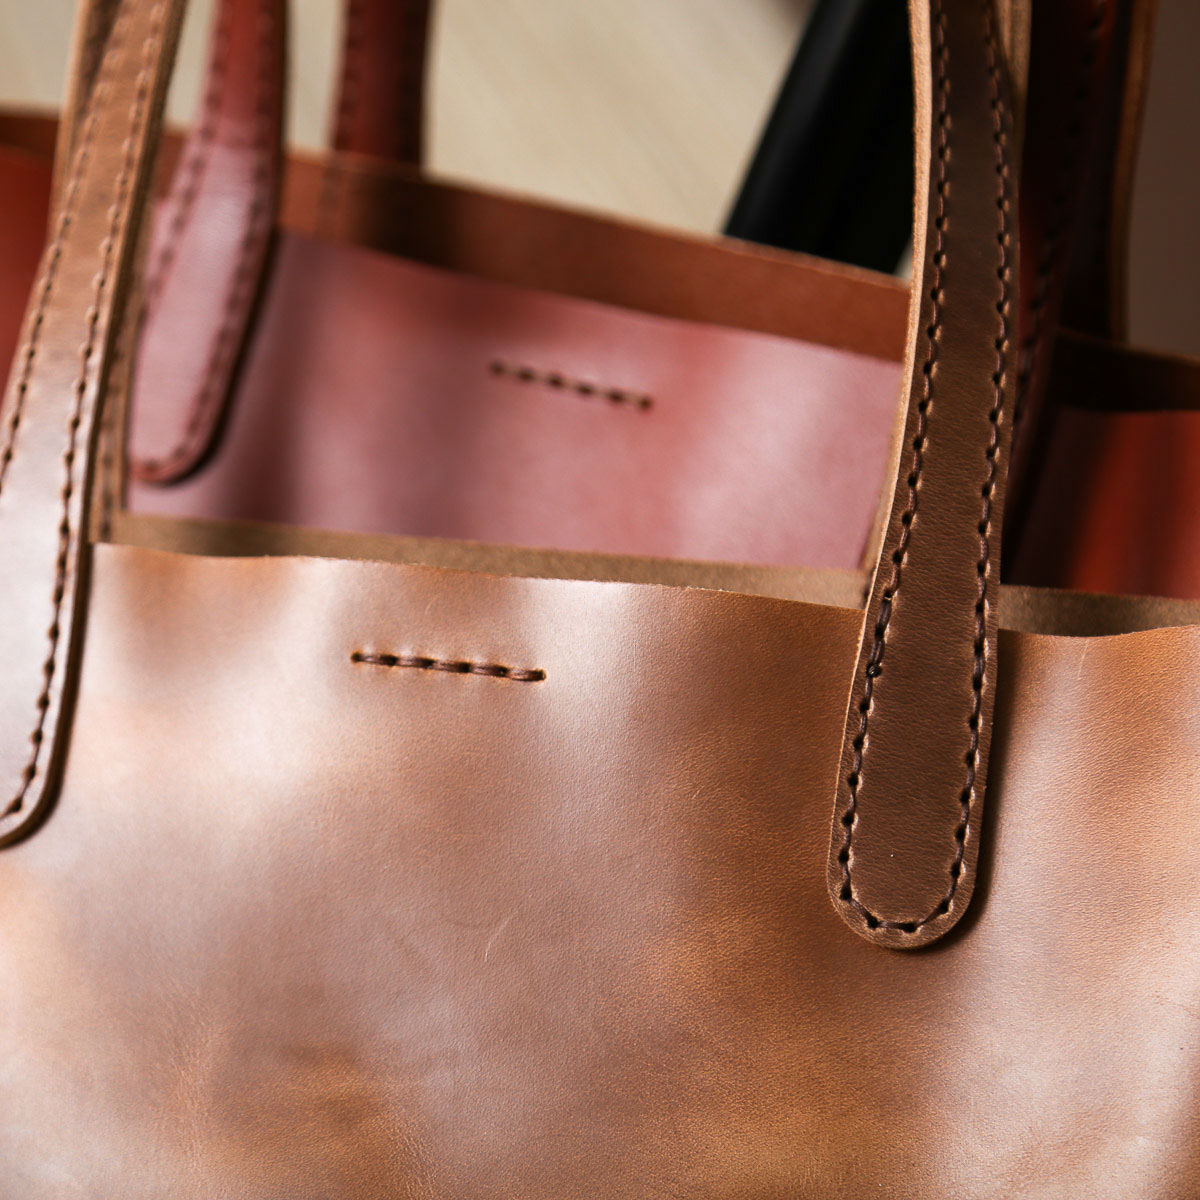 Leather Tote bag Making course — Badger House Leather